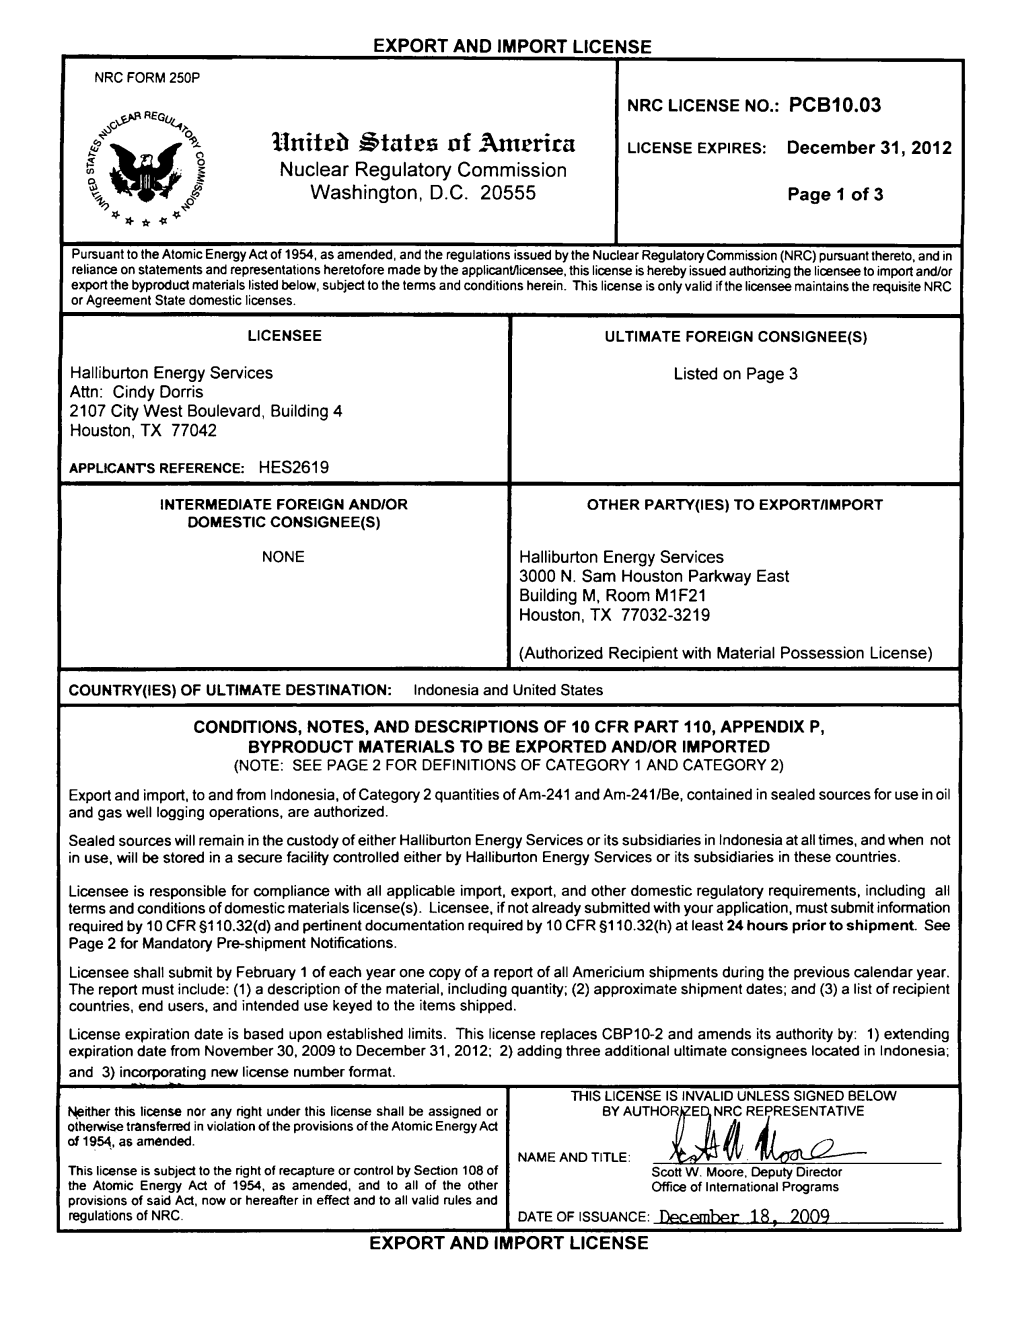 Combined Import/Export License Issued to Halliburton Dated